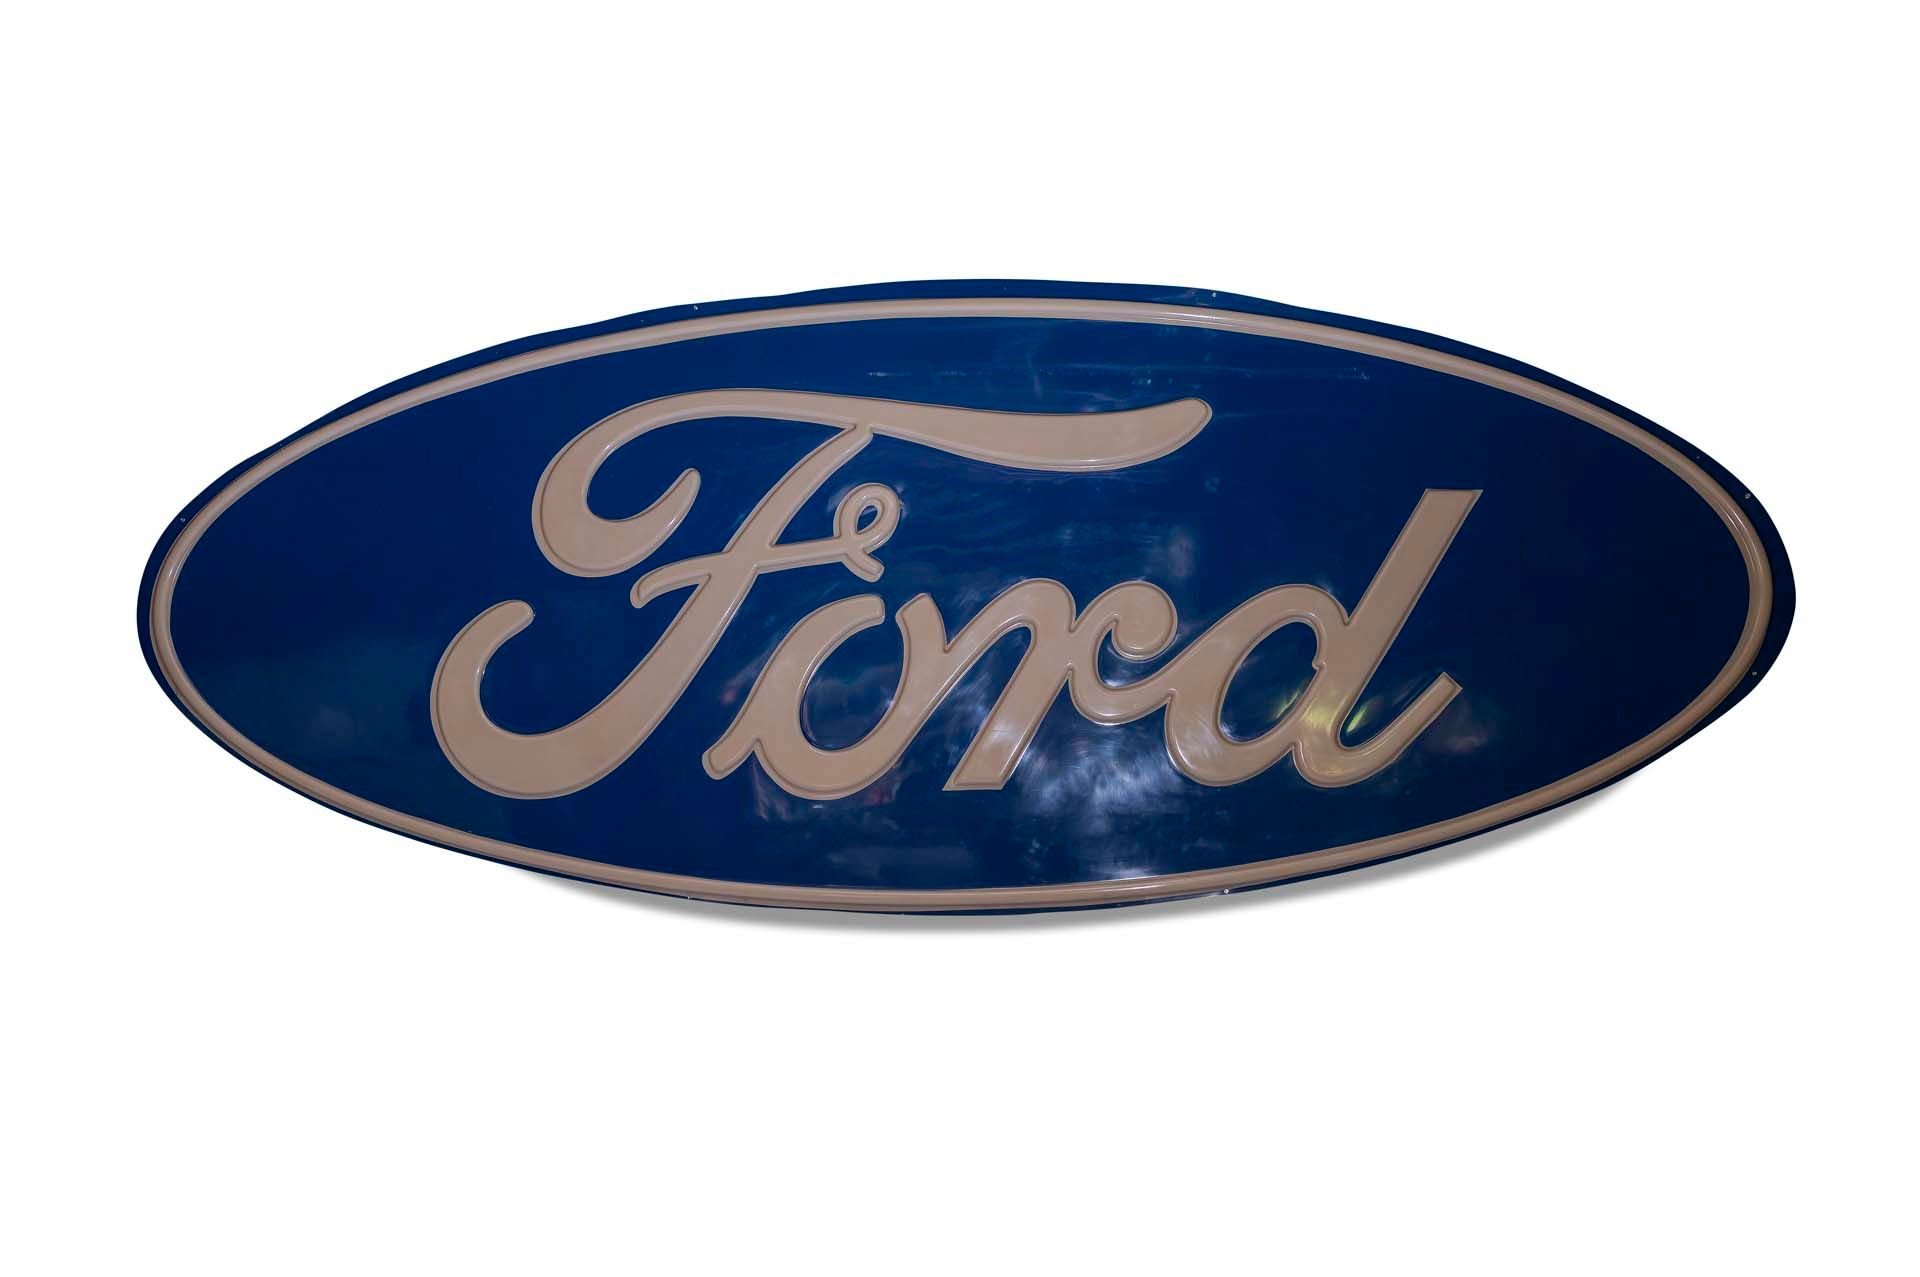 For Sale Very Large Ford Oval Plastic Dealership Sign